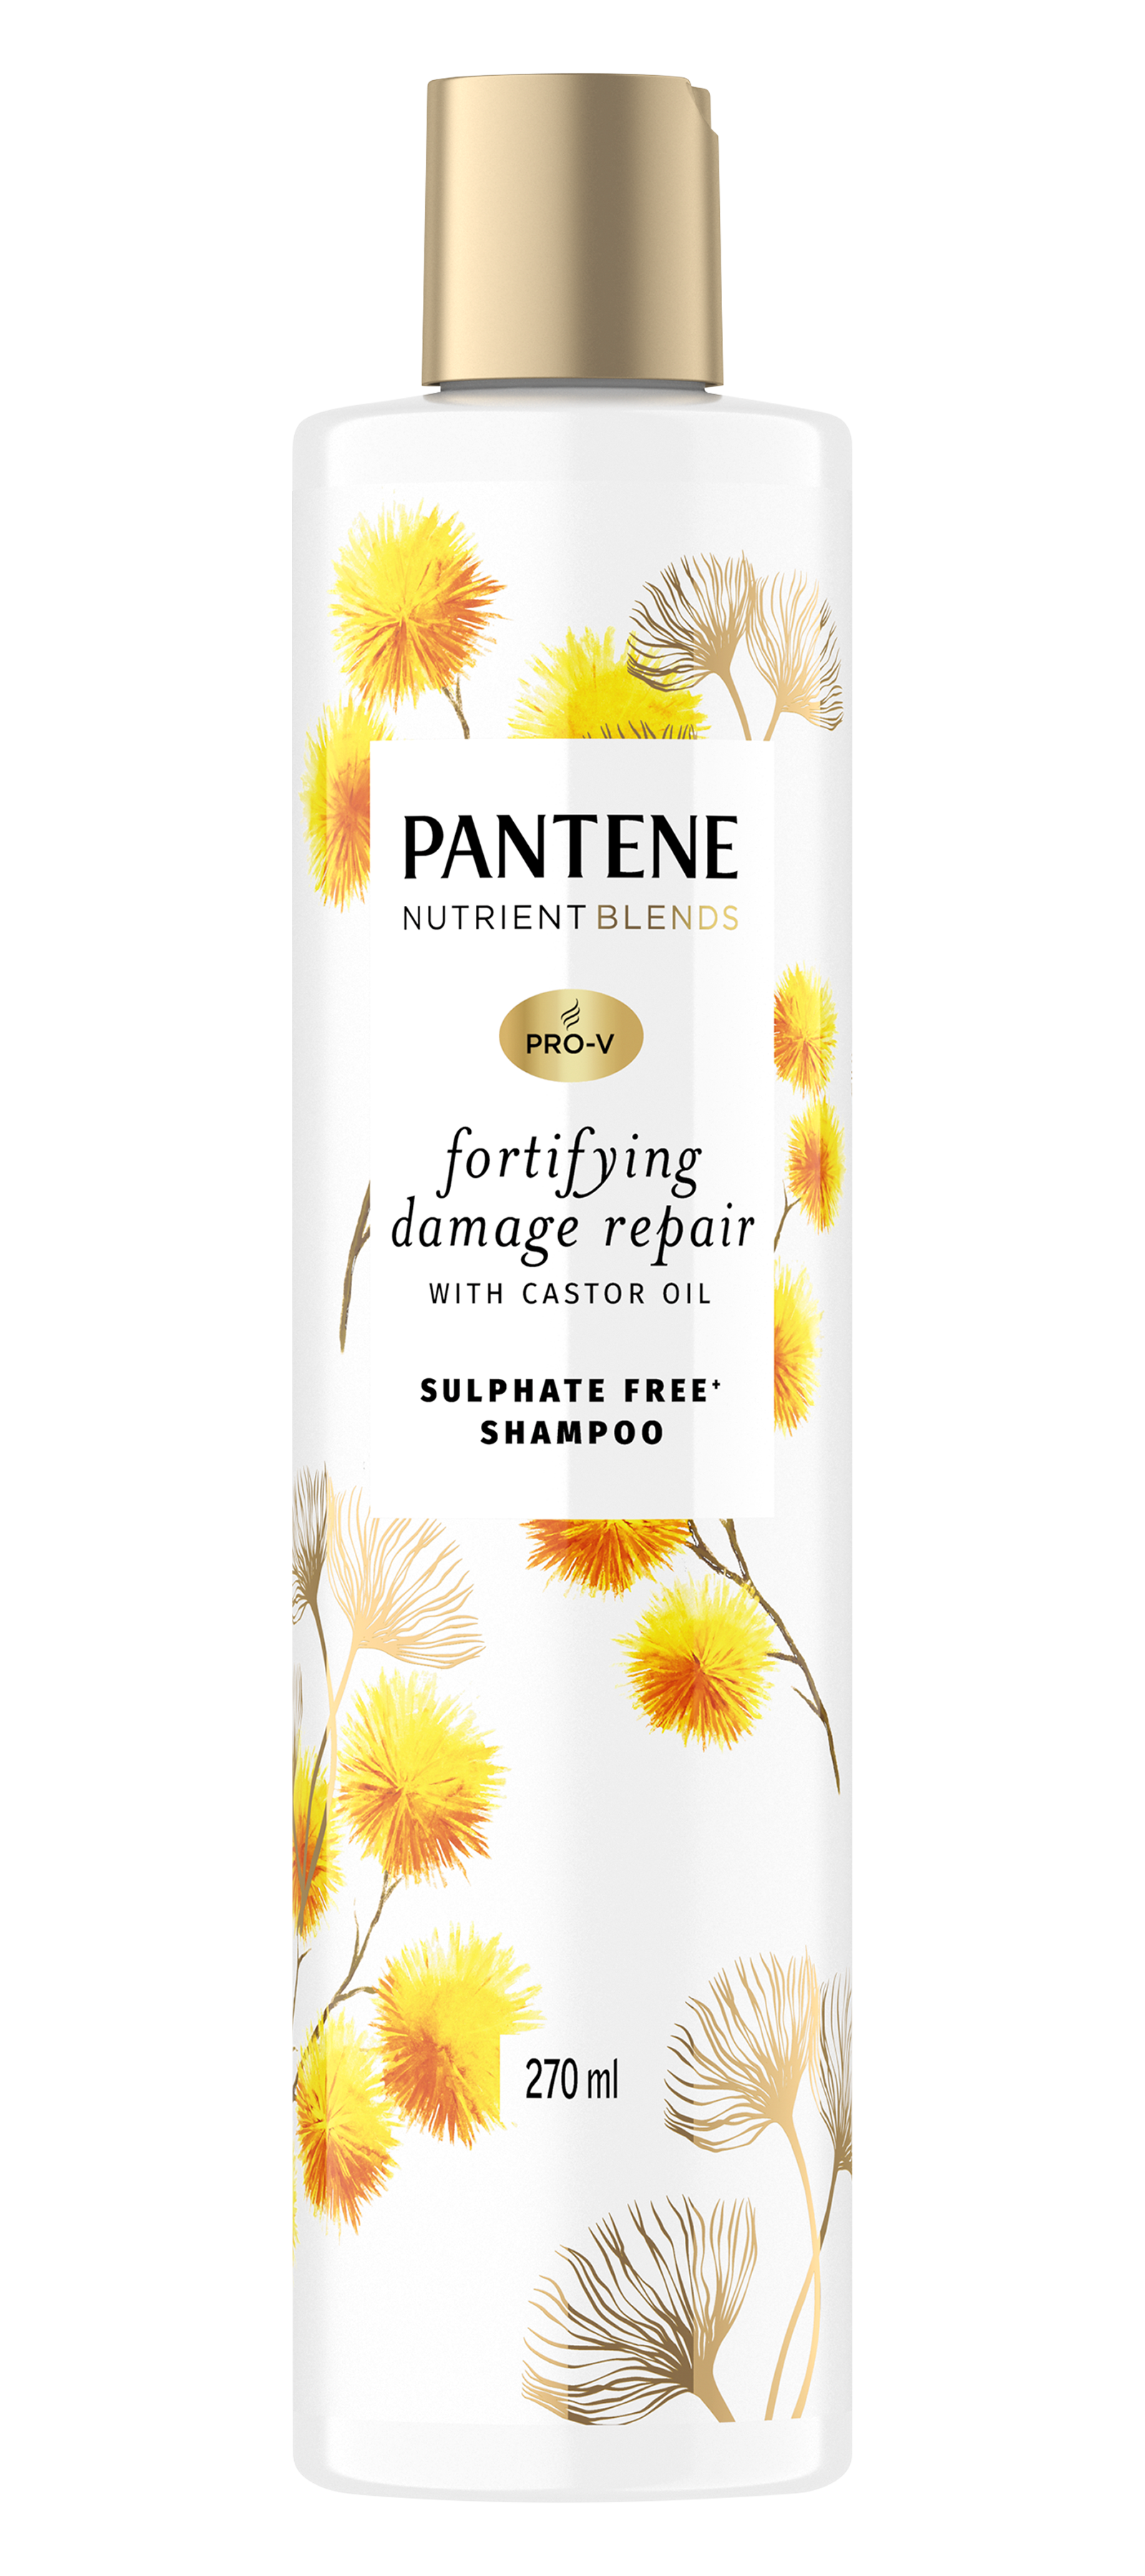 Pantene Nutrient Blends Fortifying Damage Repair Shampoo with Castor Oil